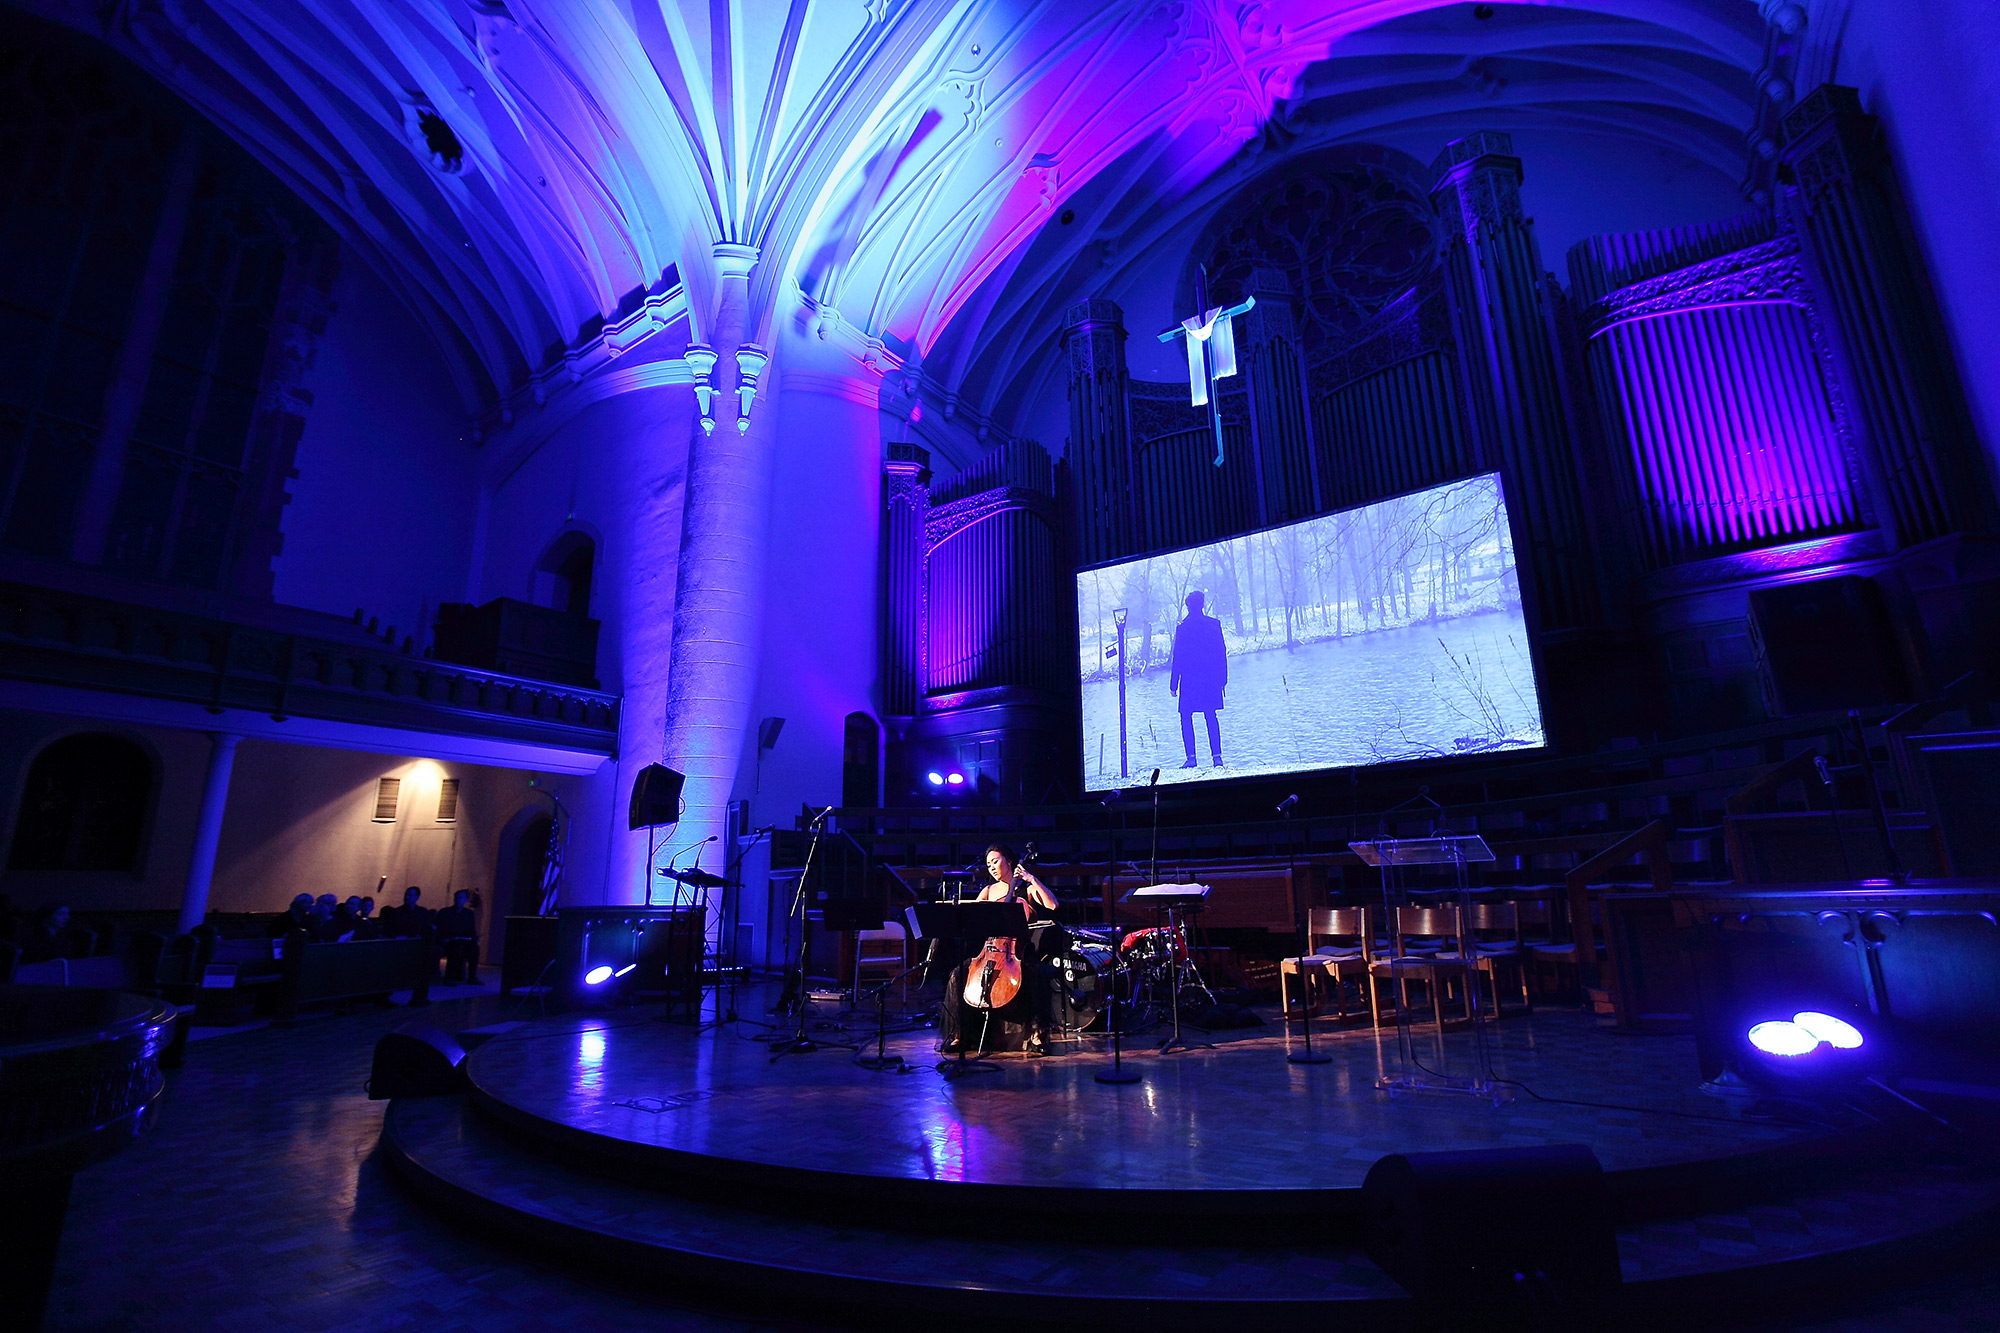 Faith, film, and music combine at Fuller Seminary's inauguration event